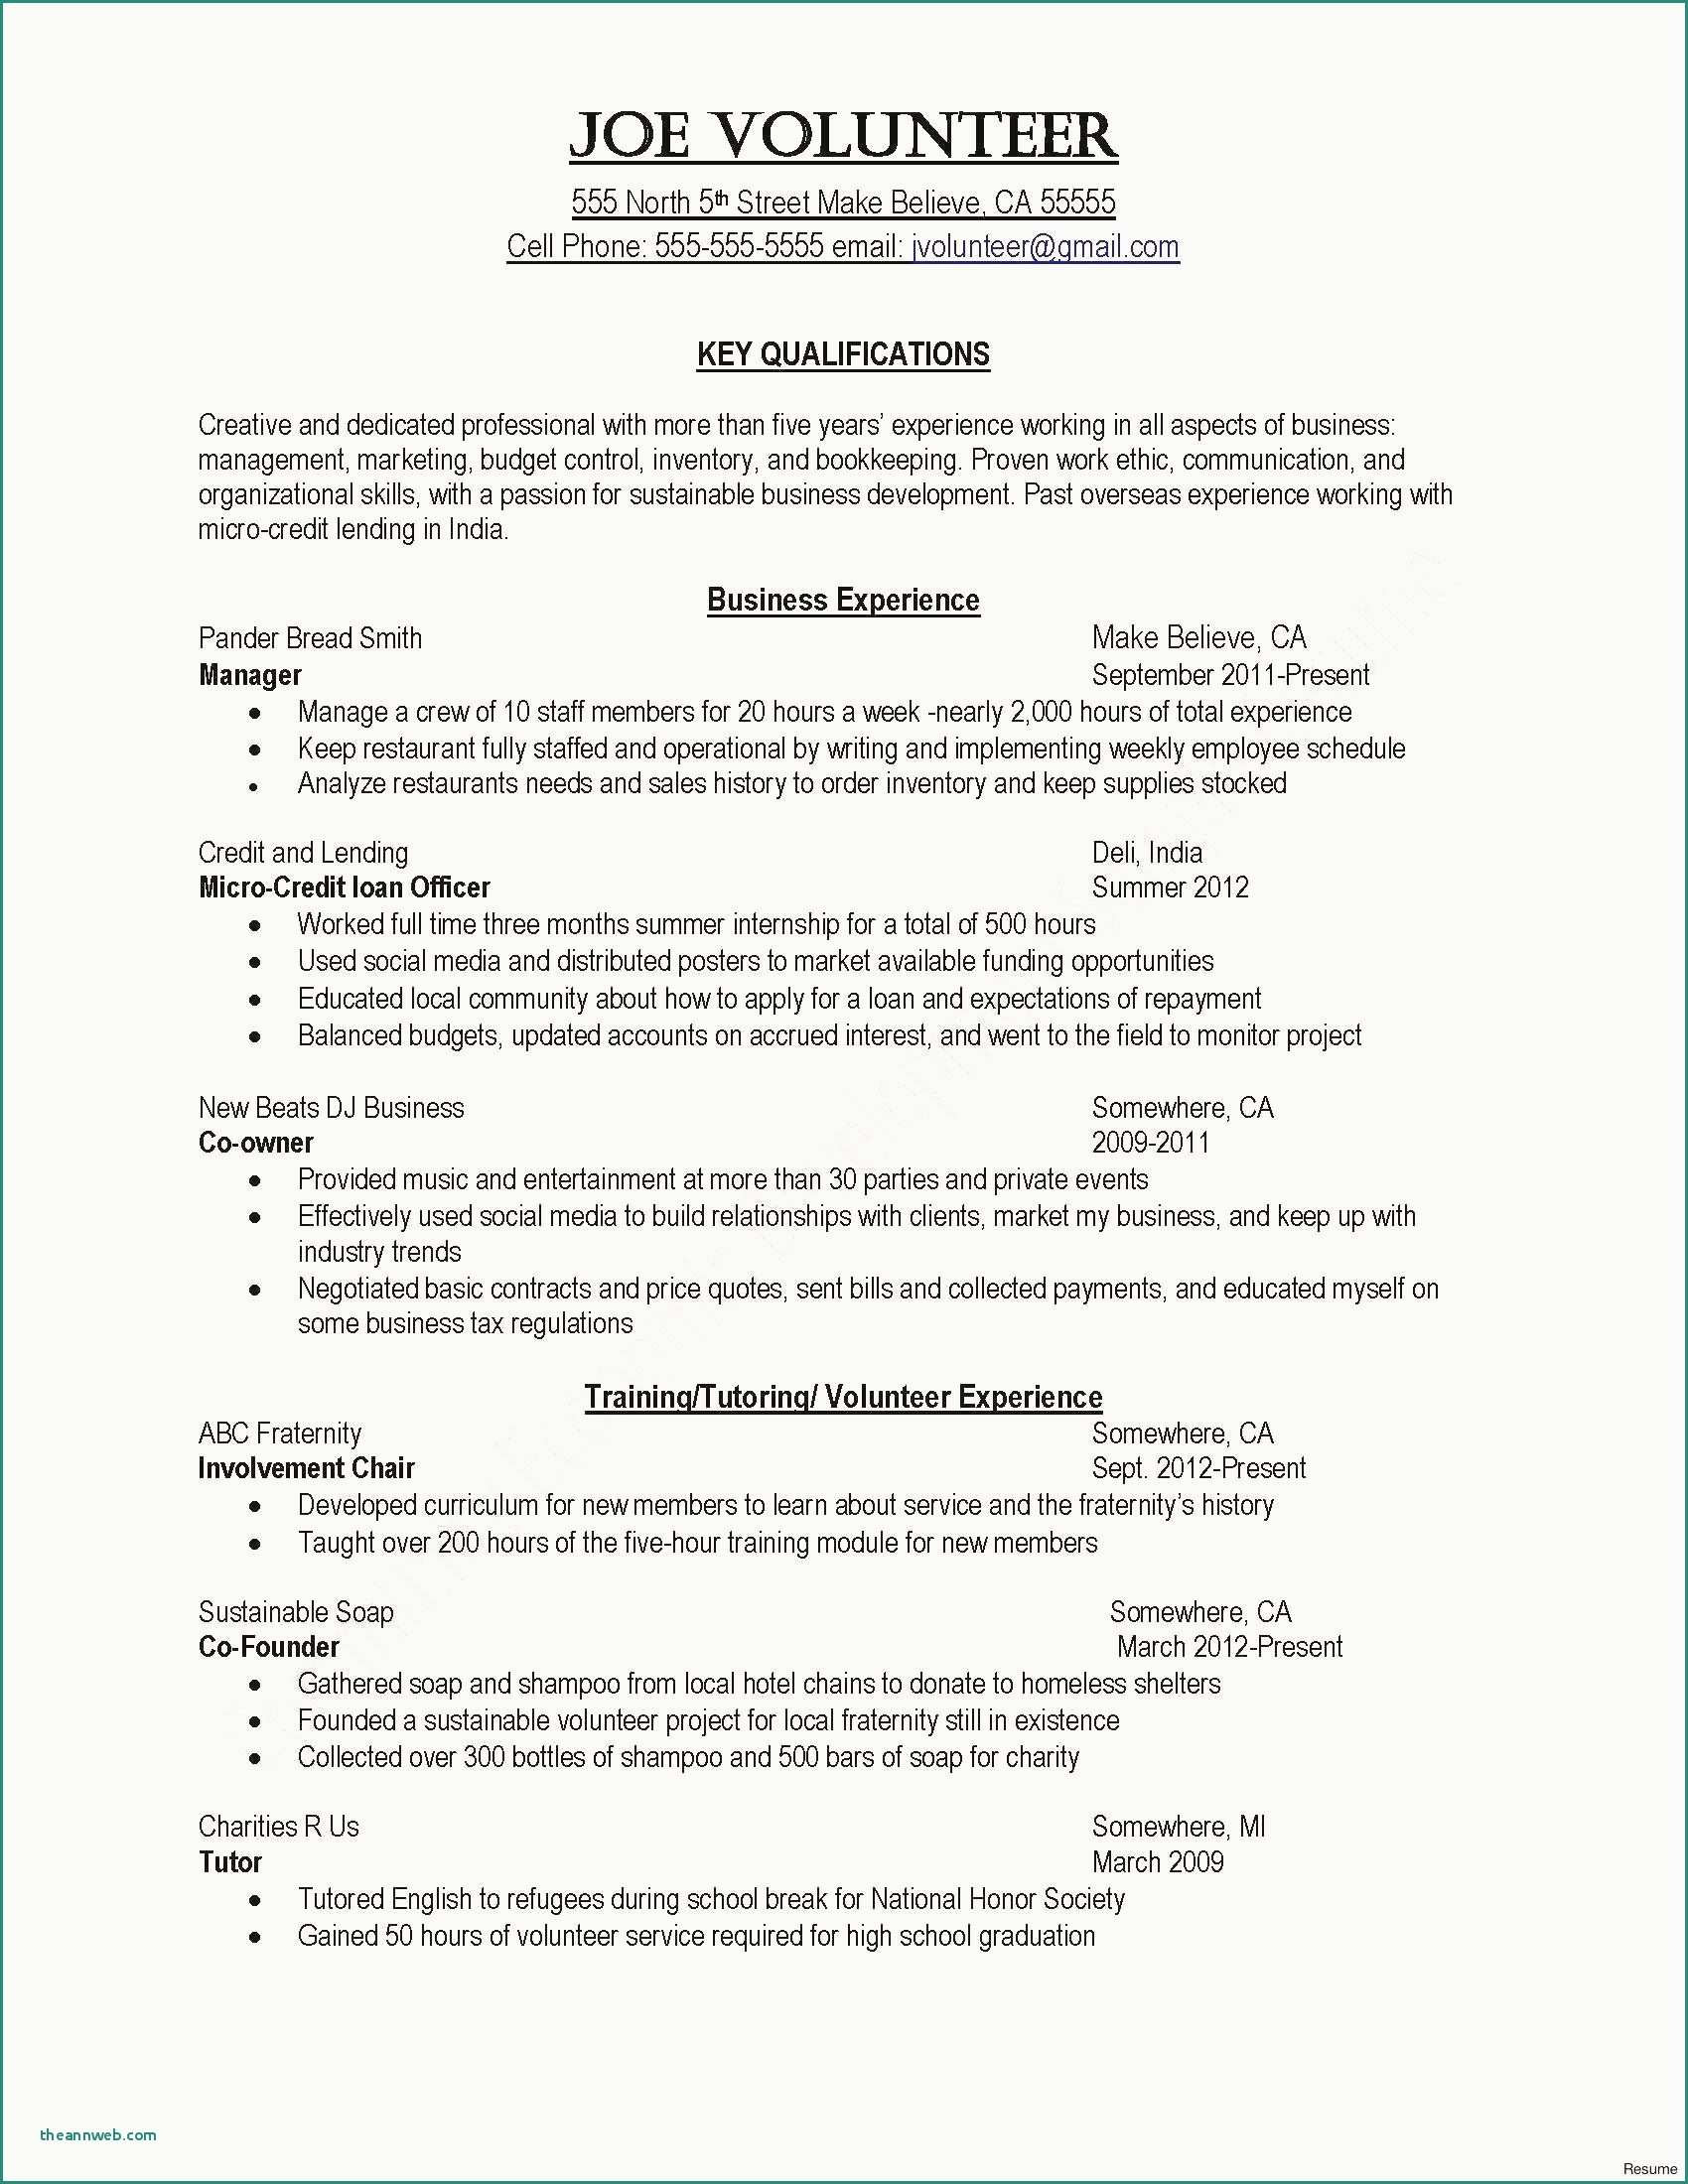 Resume For High School Student Resume Templates For Highschool Students Examples How To Write A Resume Teenager Resume Templates For Highschool Of Resume Templates For Highschool Students resume for high school student|wikiresume.com